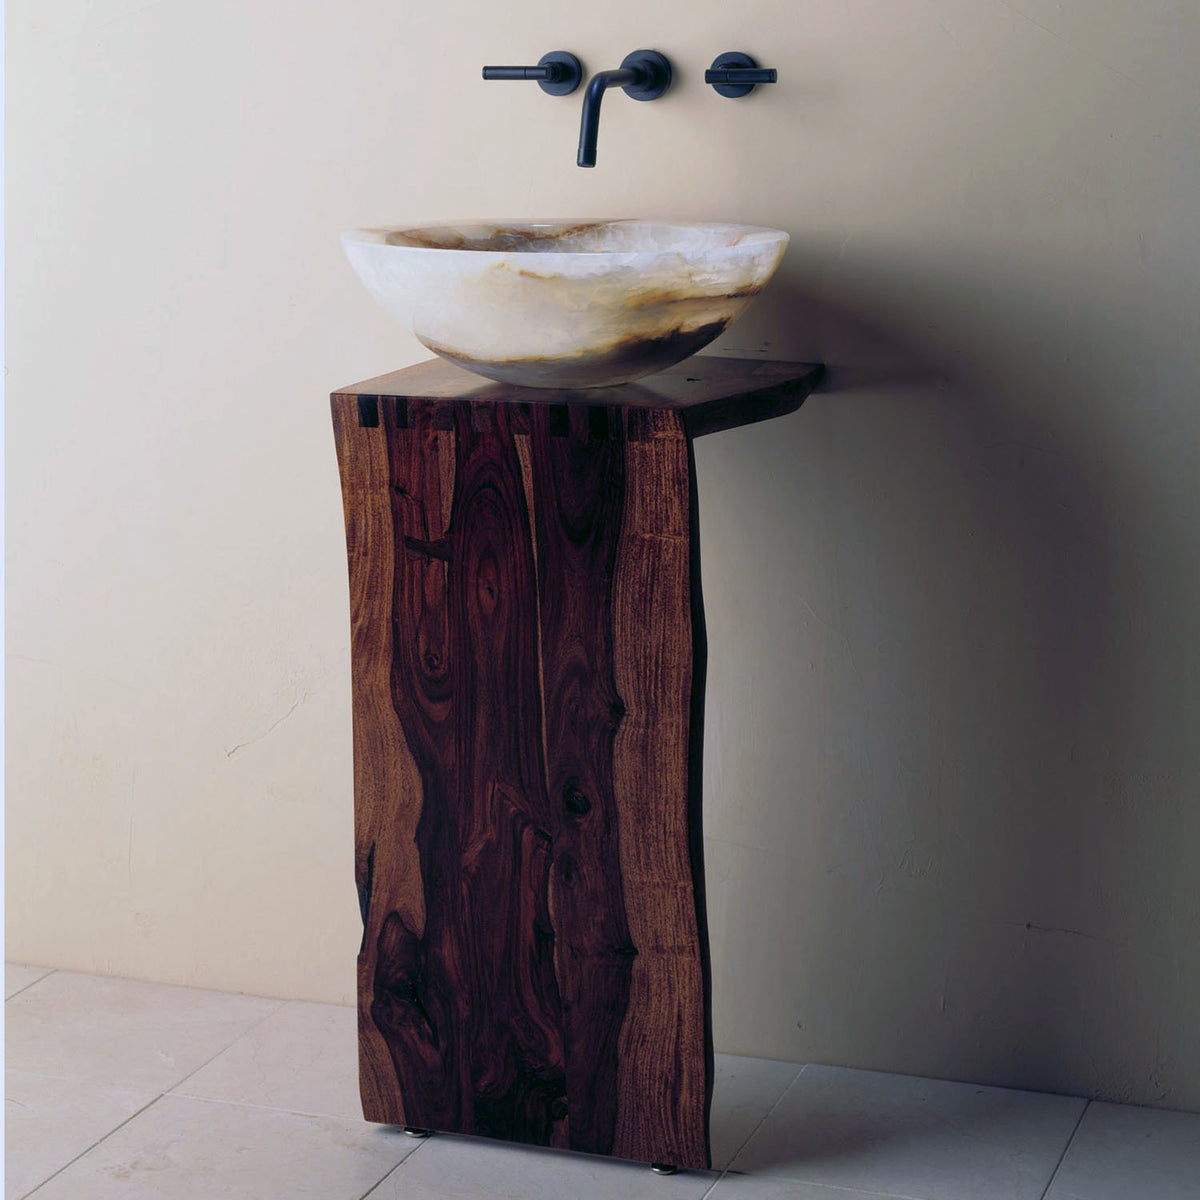 Stone Forest L-Slab Pedestal made from sustainable hardwood with multi-onyx  Urban Vessel SInk image 2 of 2